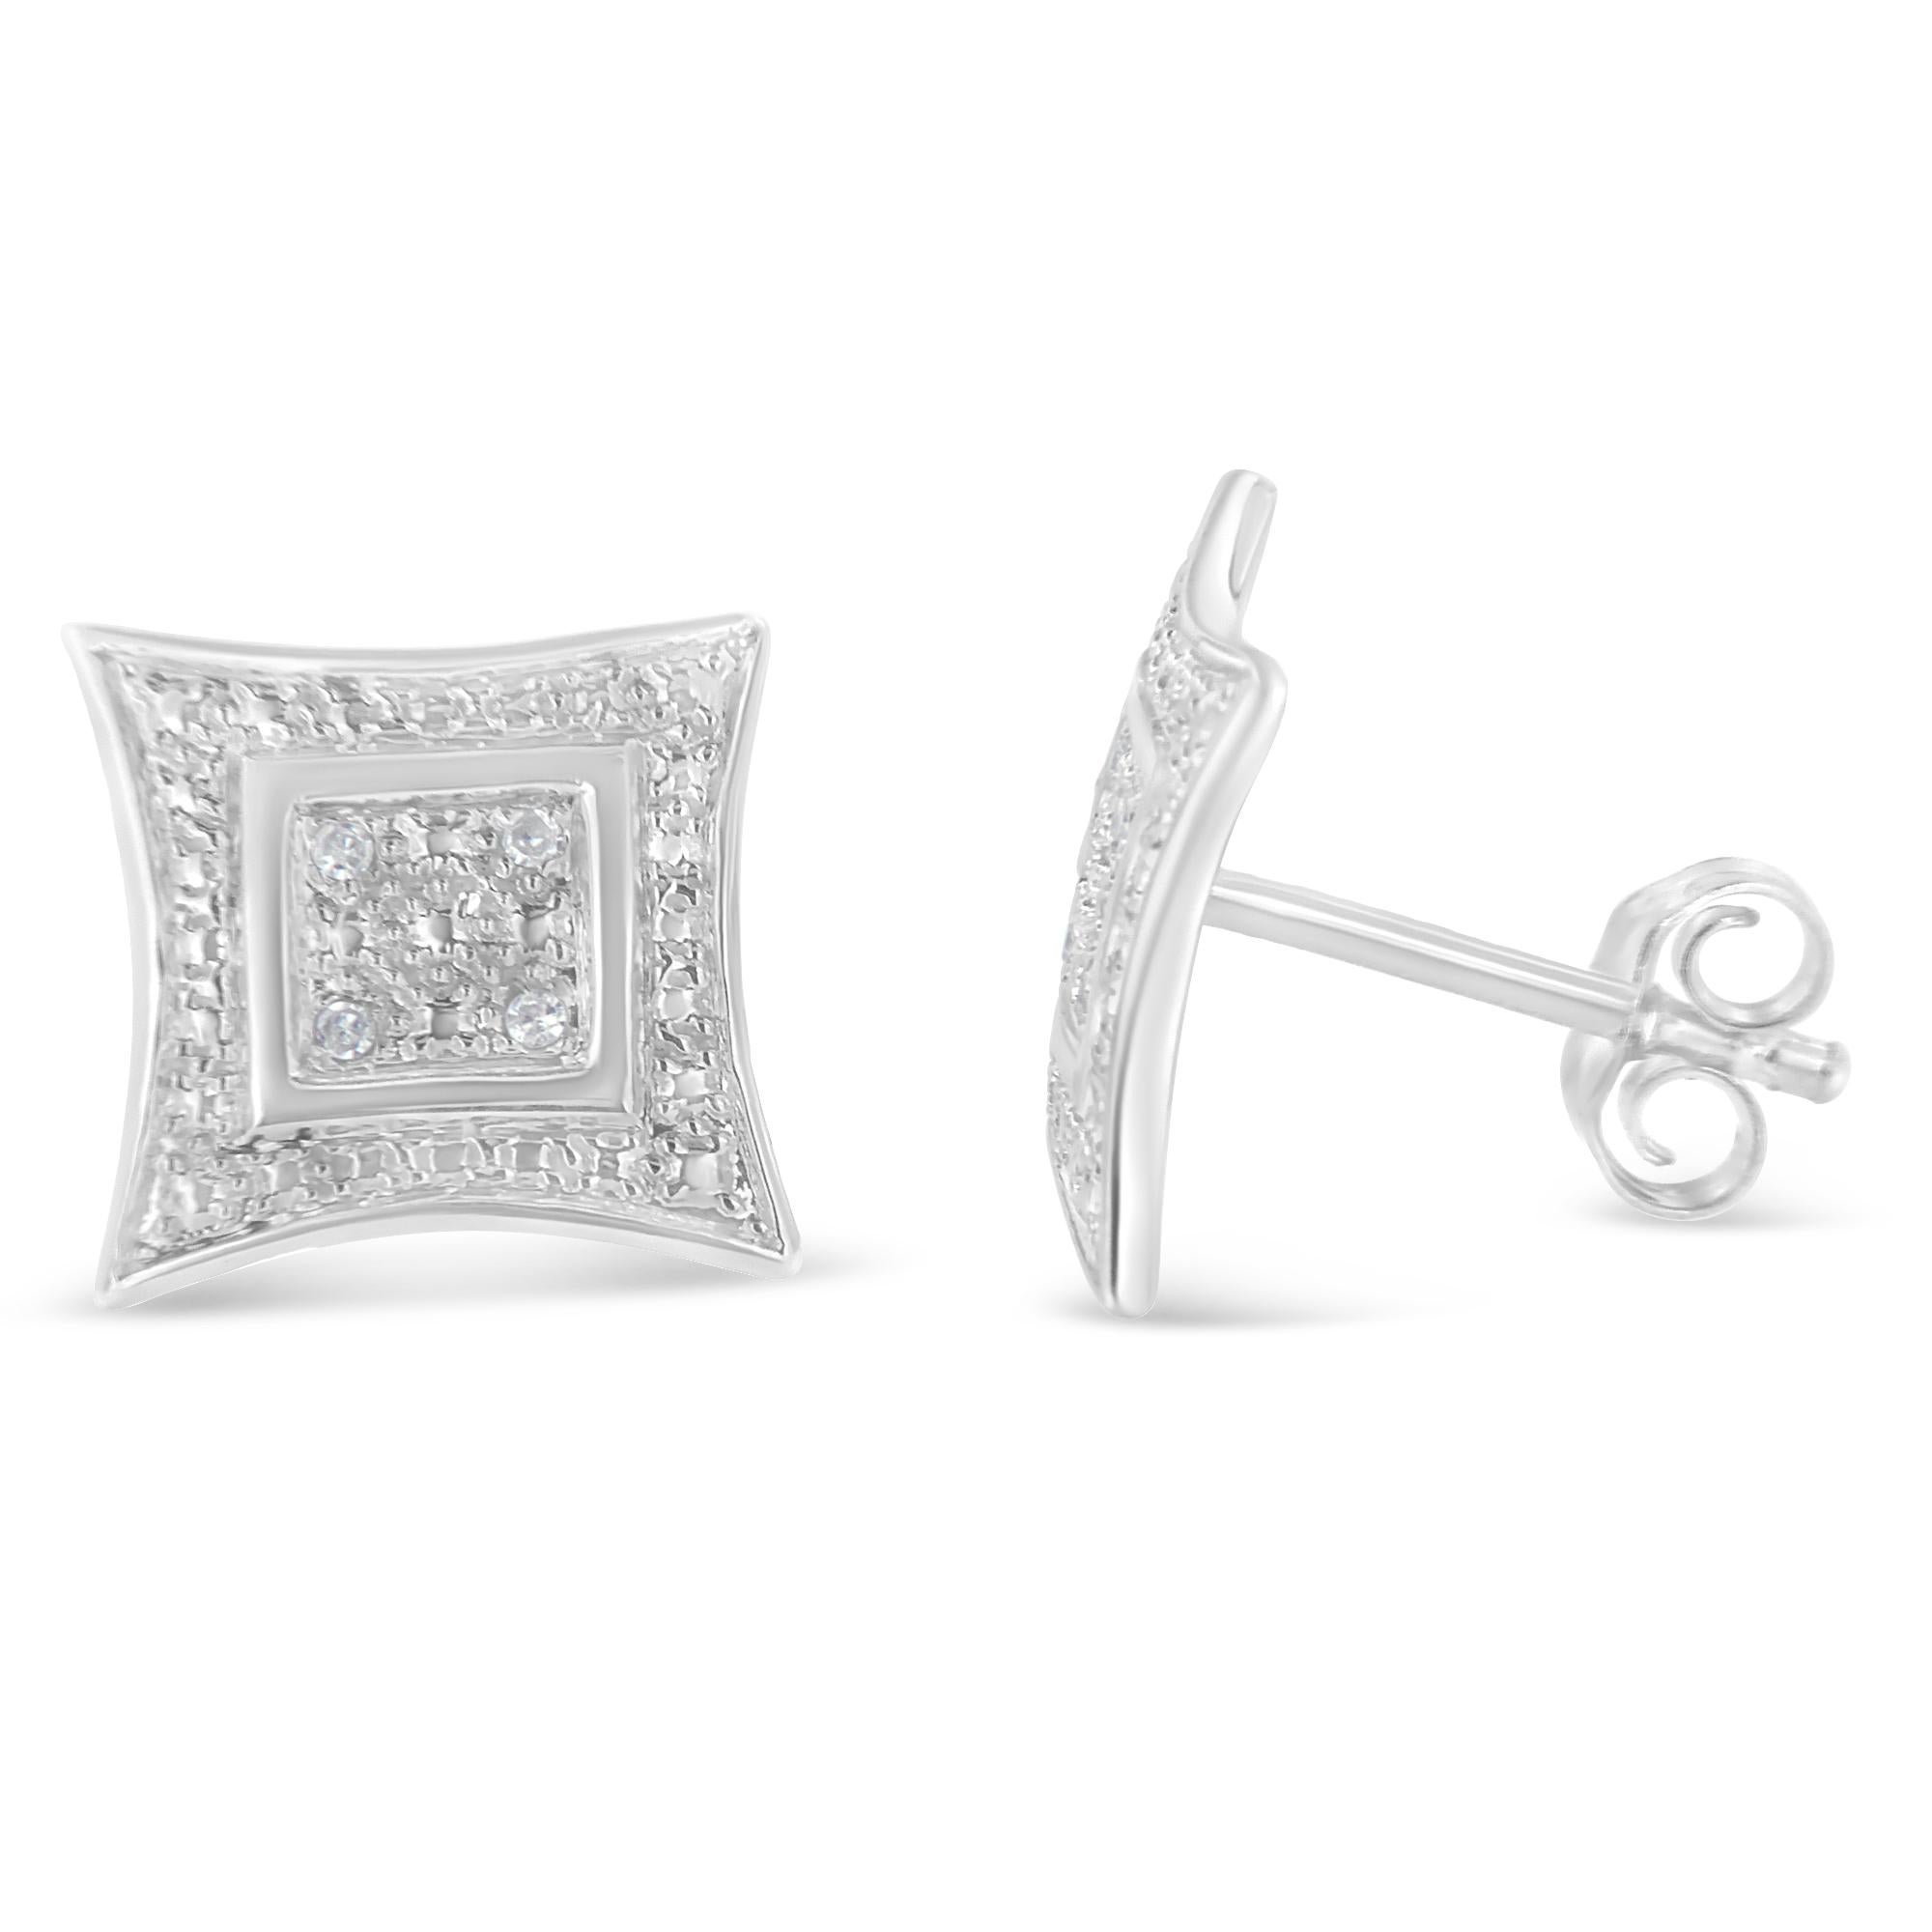 A fabulous pair of earrings is one of those must-have accessories for every lady. With eight fragments of round-cut diamonds arranged in pave setting, these sterling silver stud earrings can dazzle at any occasion.

